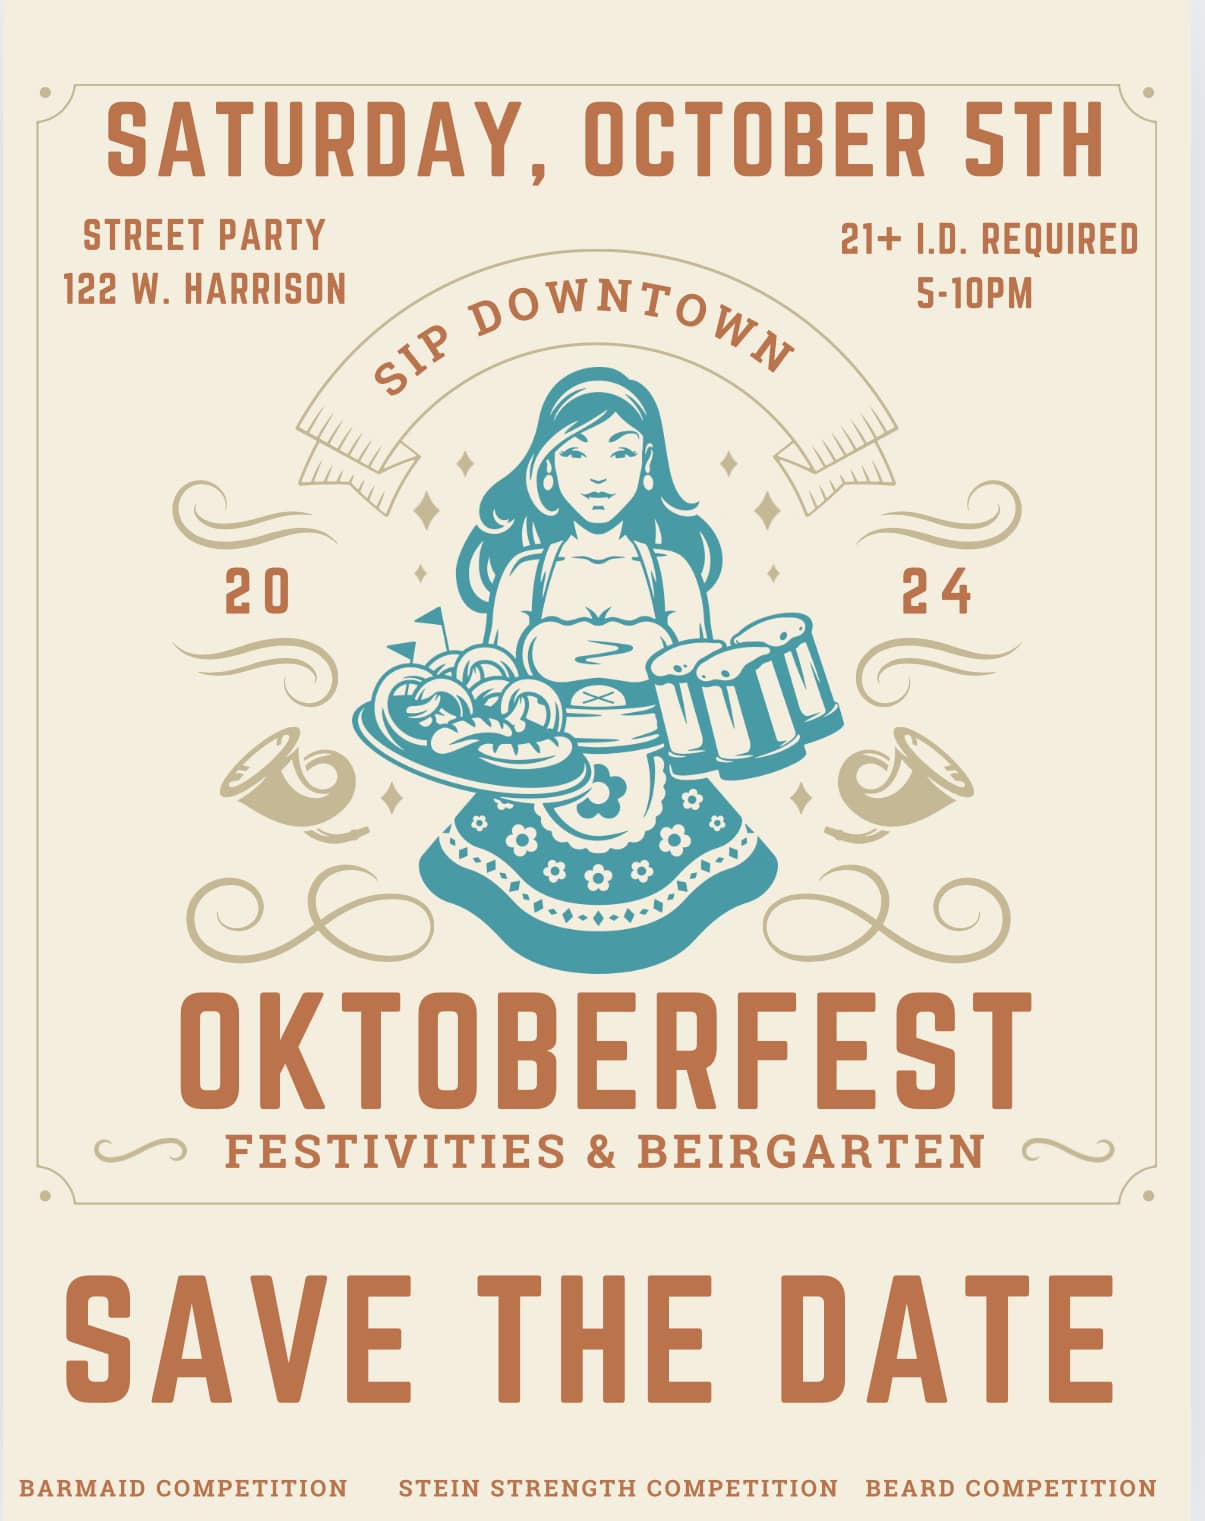 Check more about Oktoberfest